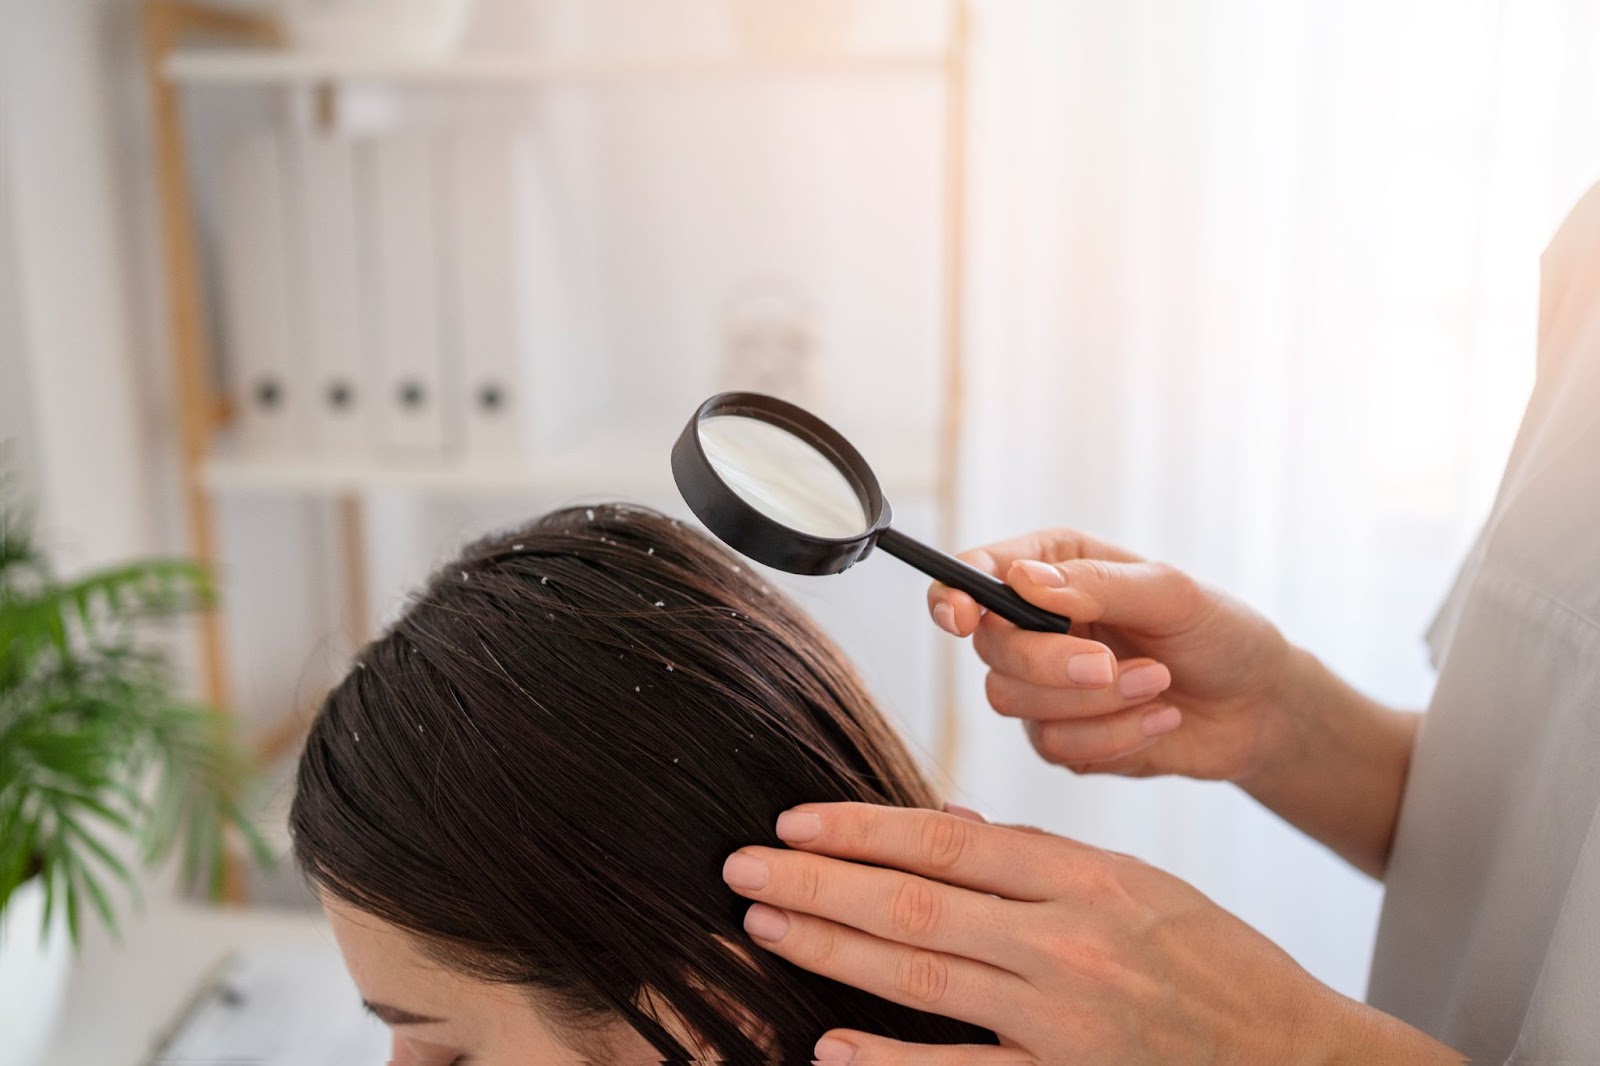 dry scalp treatment at home